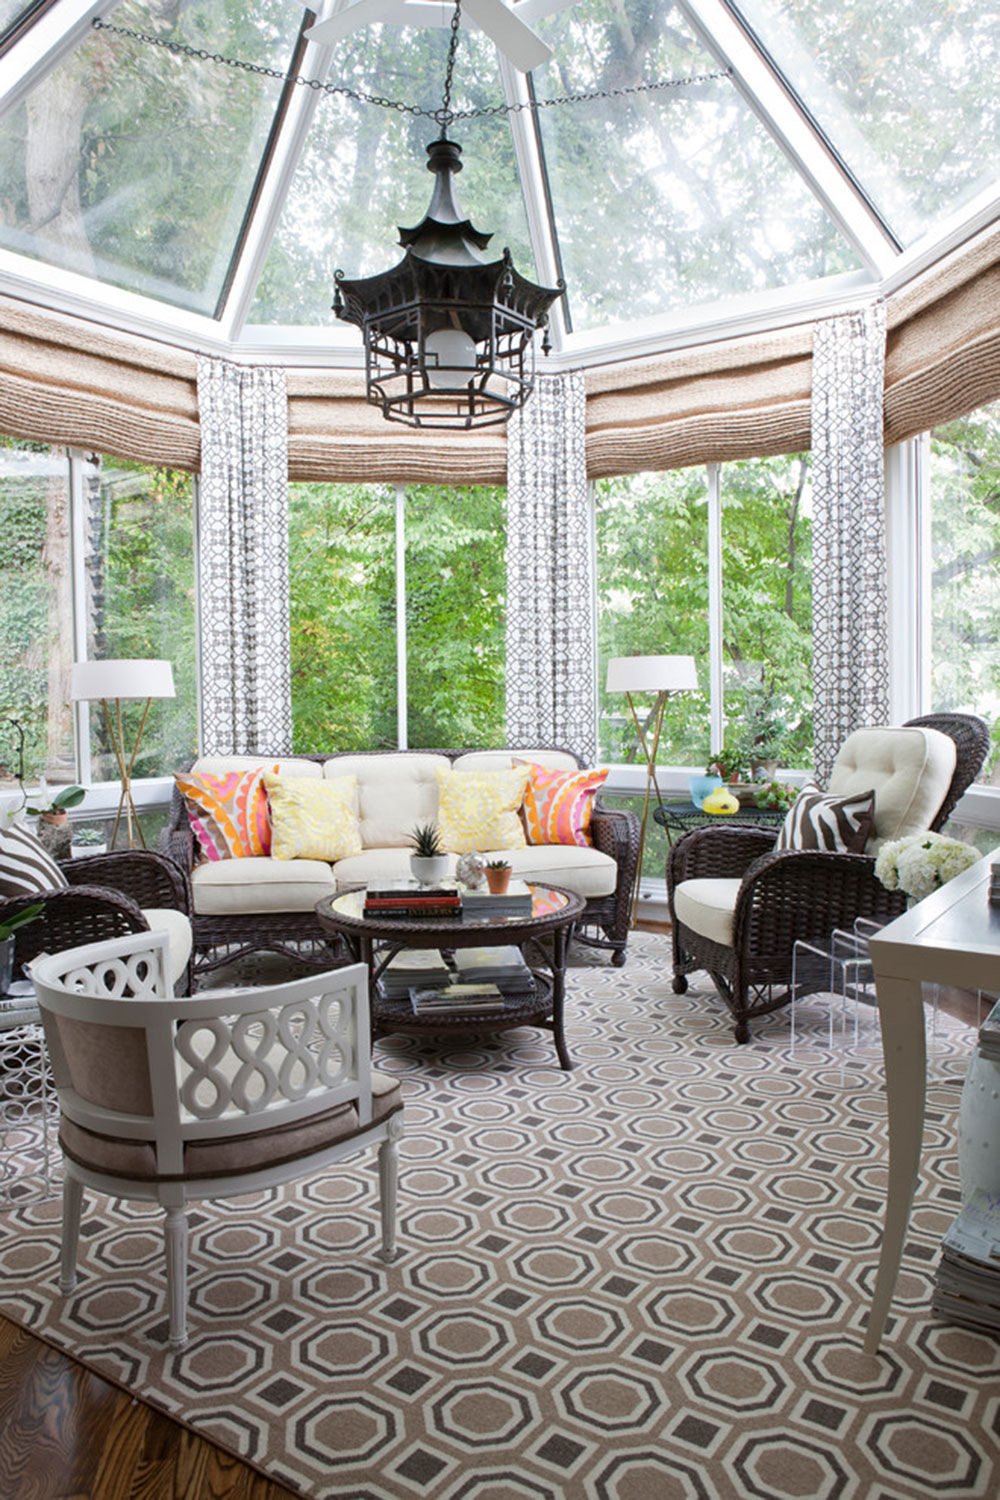 Homey-Feelings-With-These-Bay-Window-Decor-13 Bay Window Decor To Try In Your Home